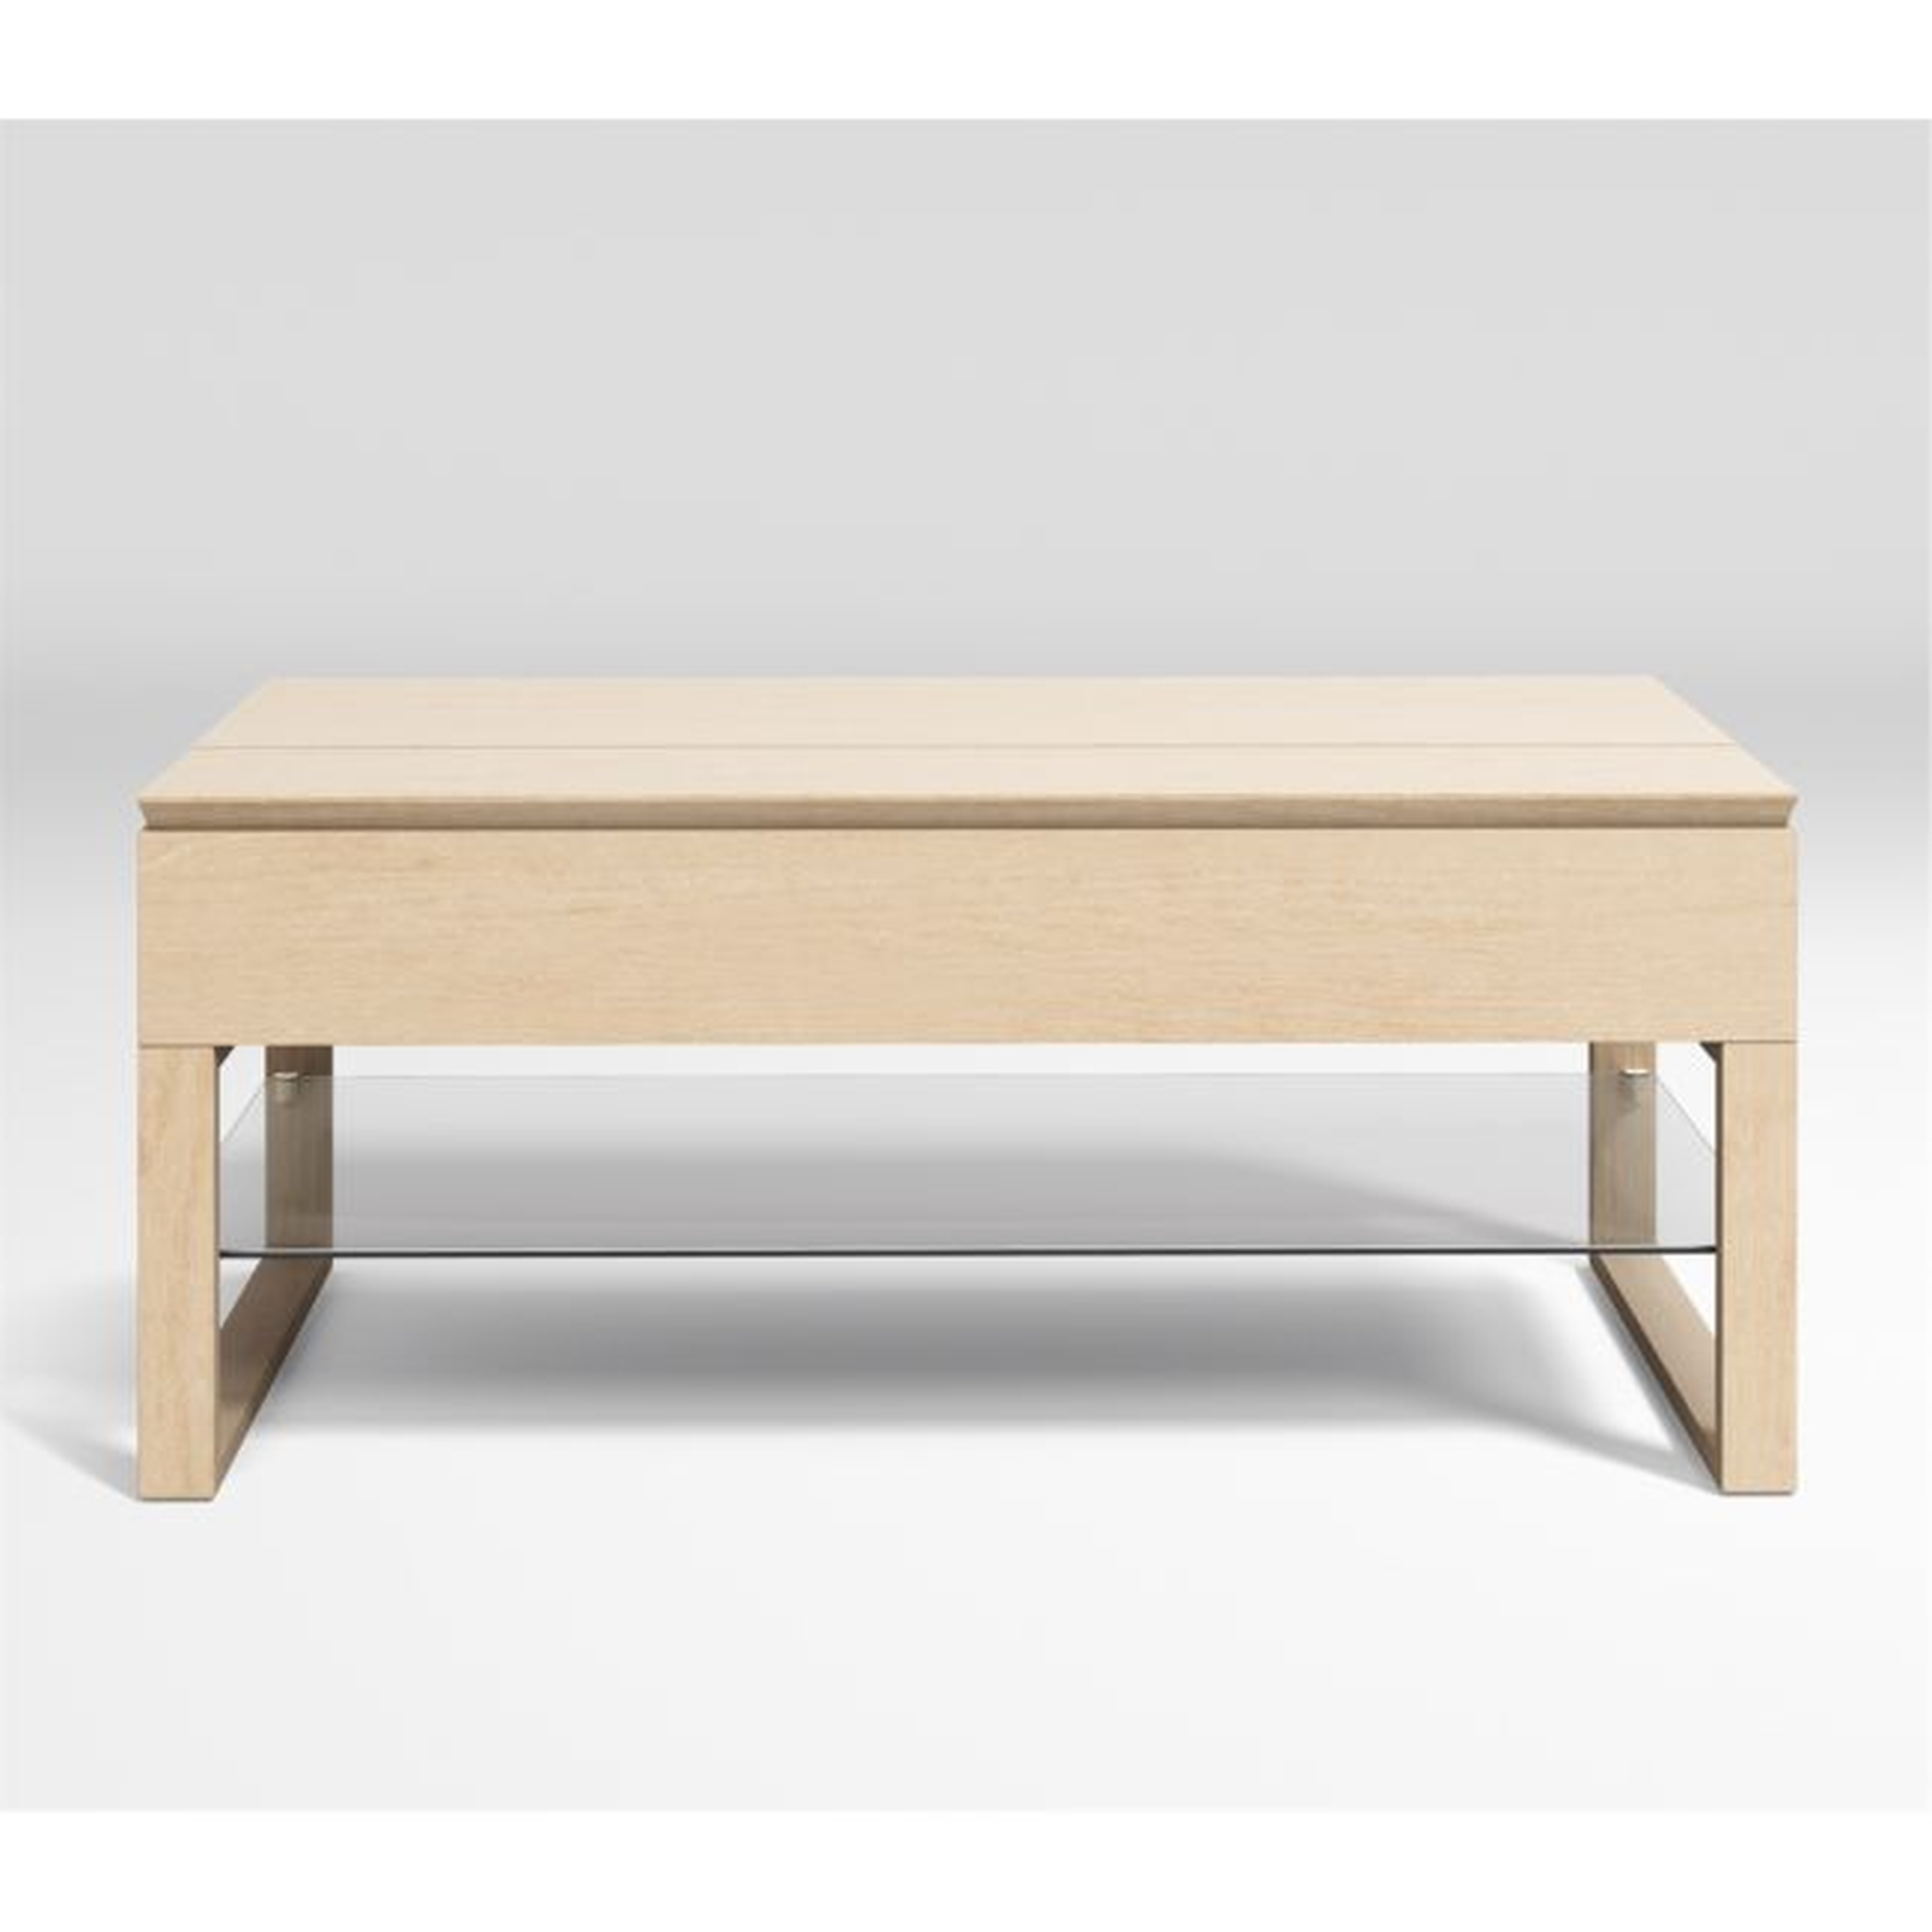 Falster Lift-Top Coffee Table - Crate and Barrel